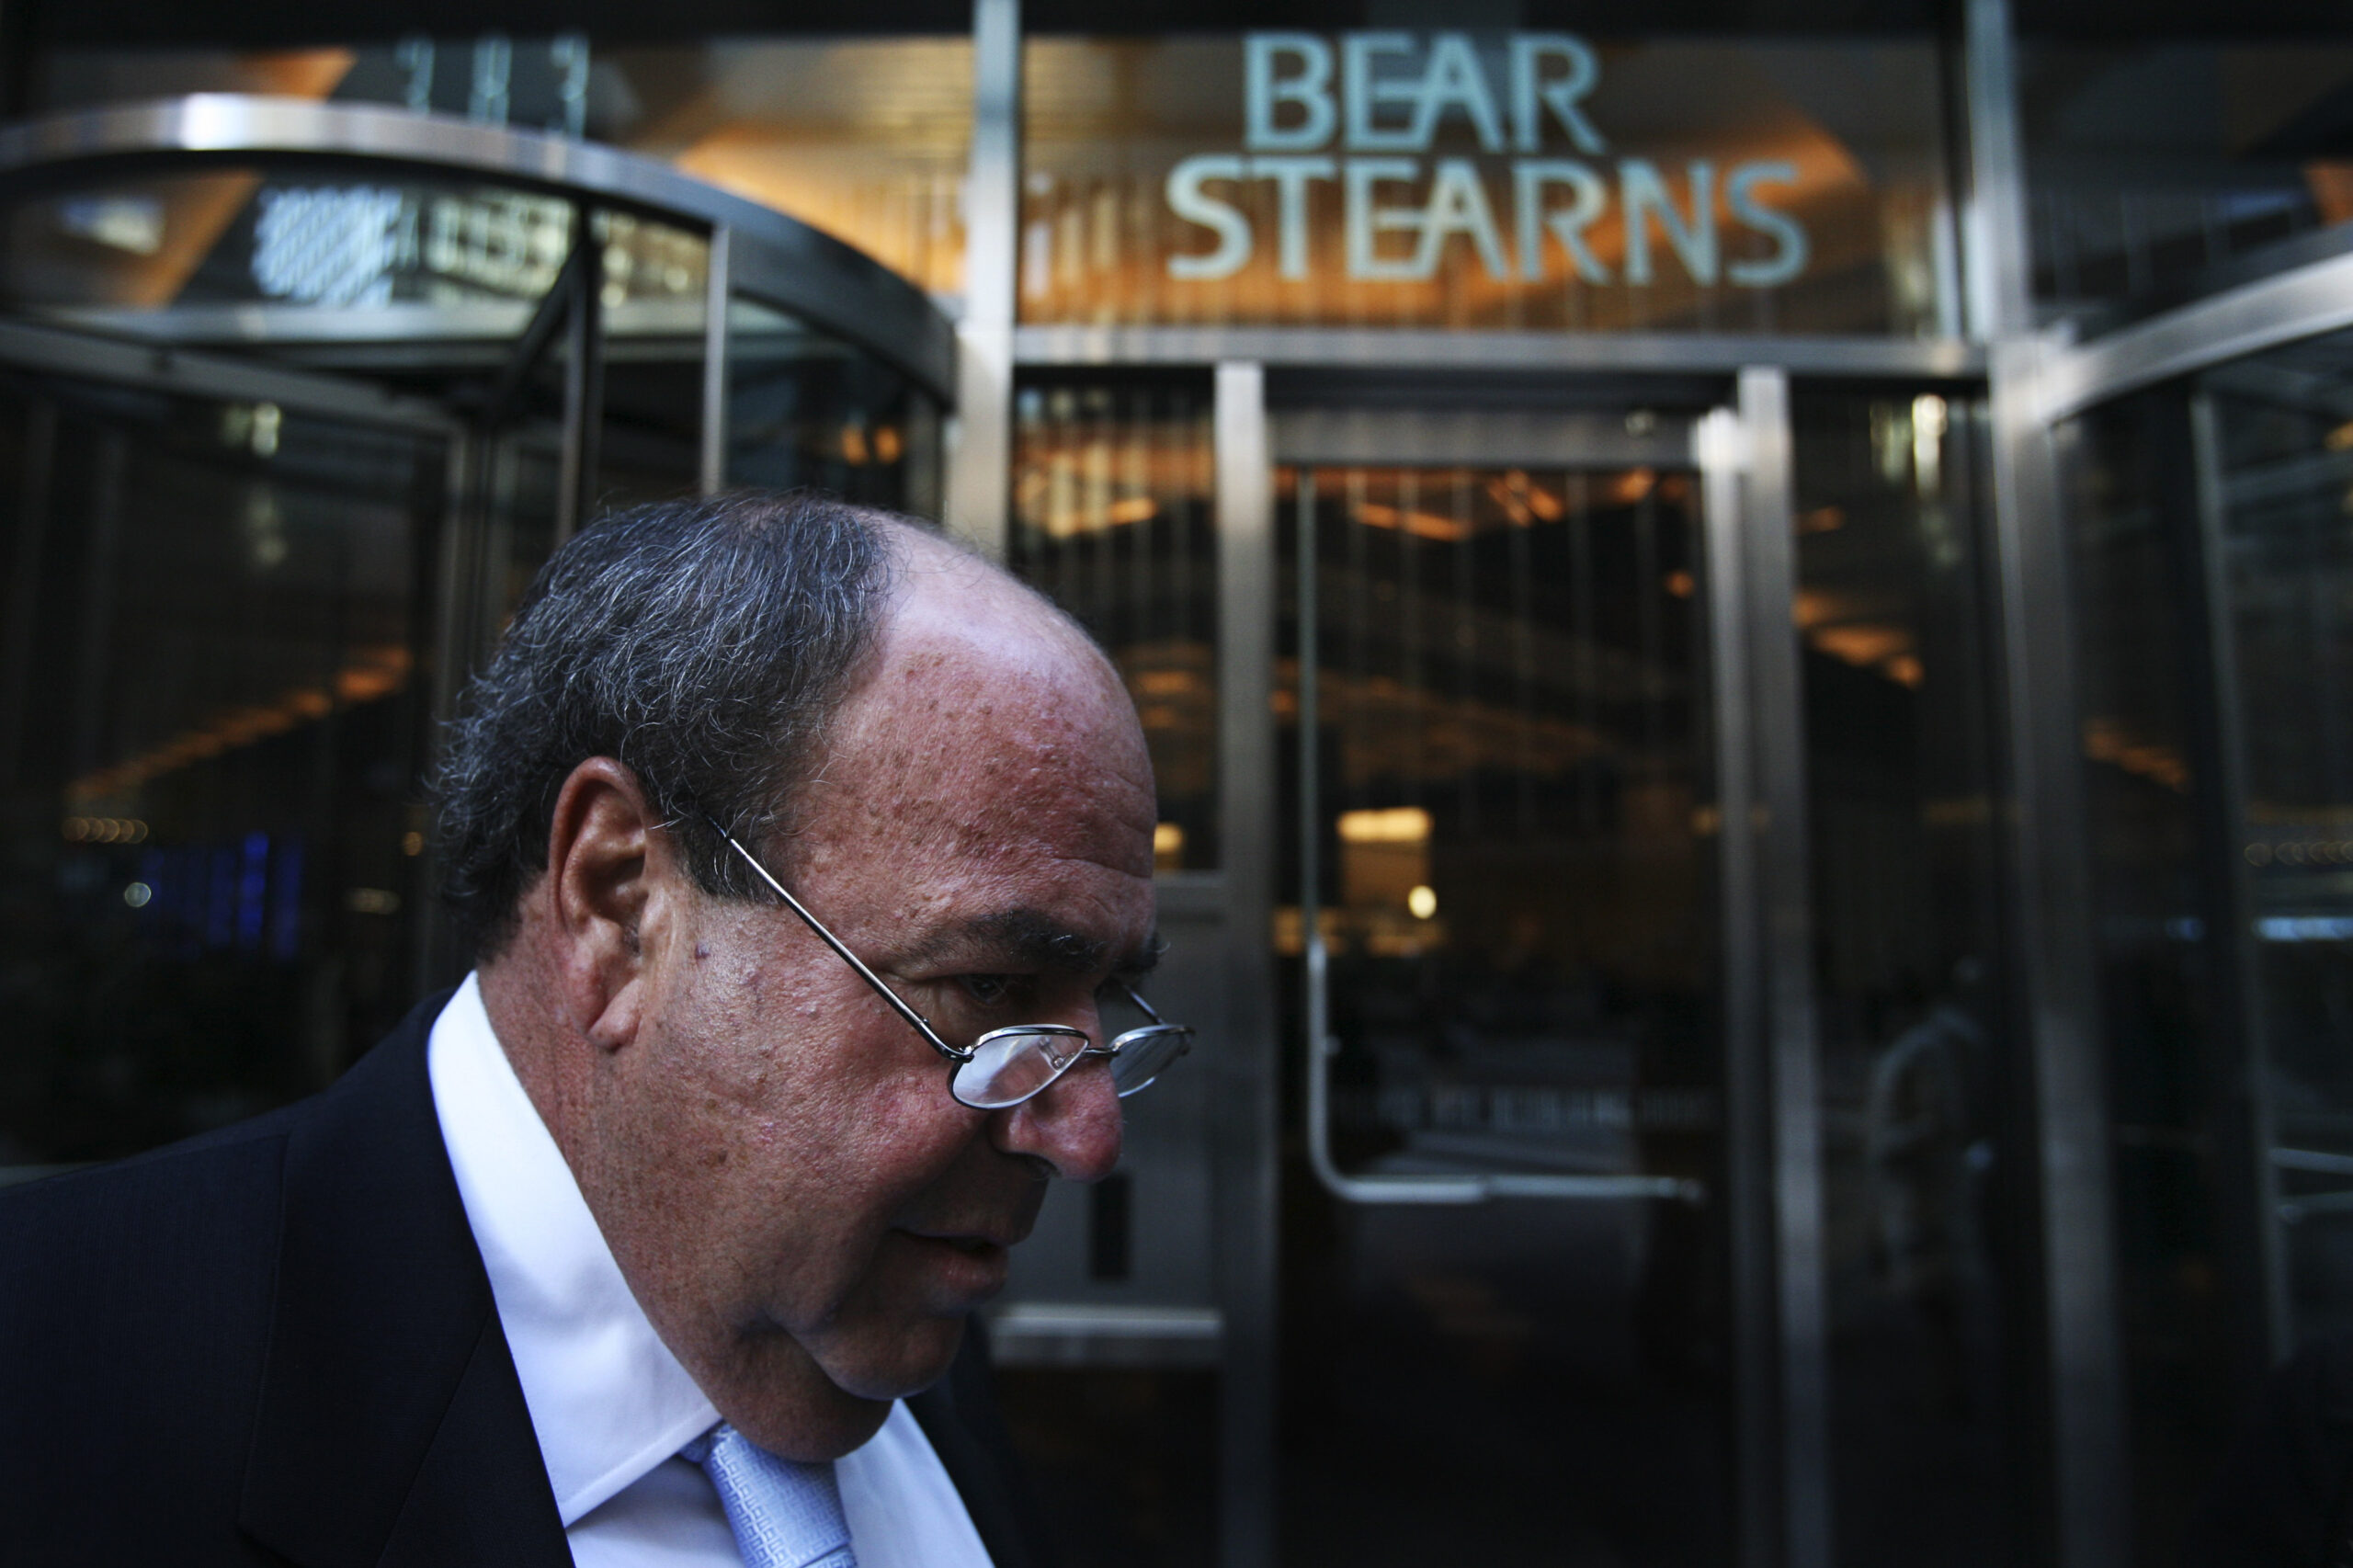 Steven Raphael, a broker with Bear Stearns, enters the company headquarters